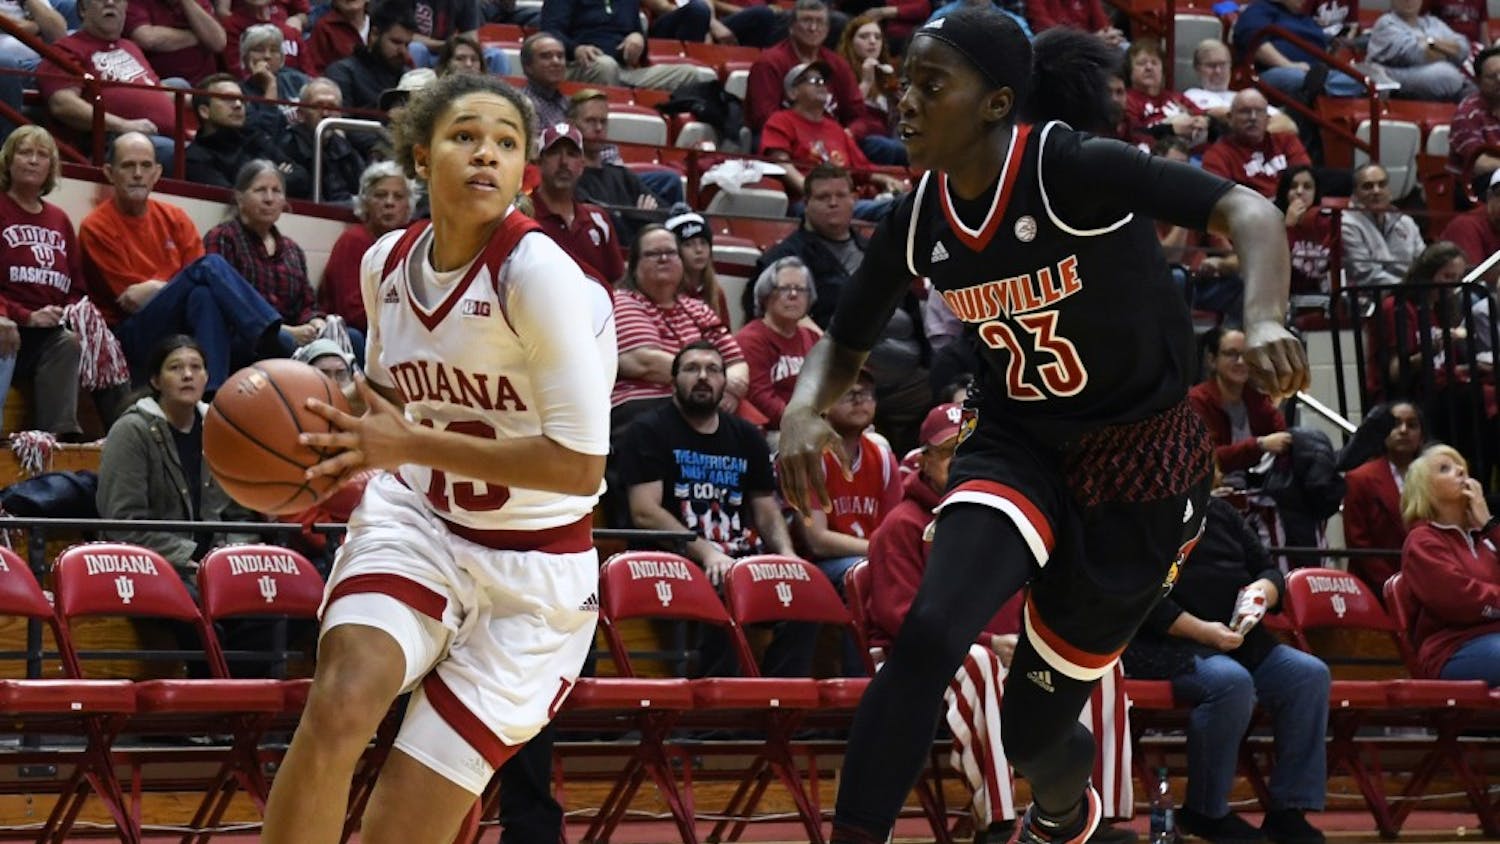 GALLERY: IU women's basketball loses to Louisville, 72-59